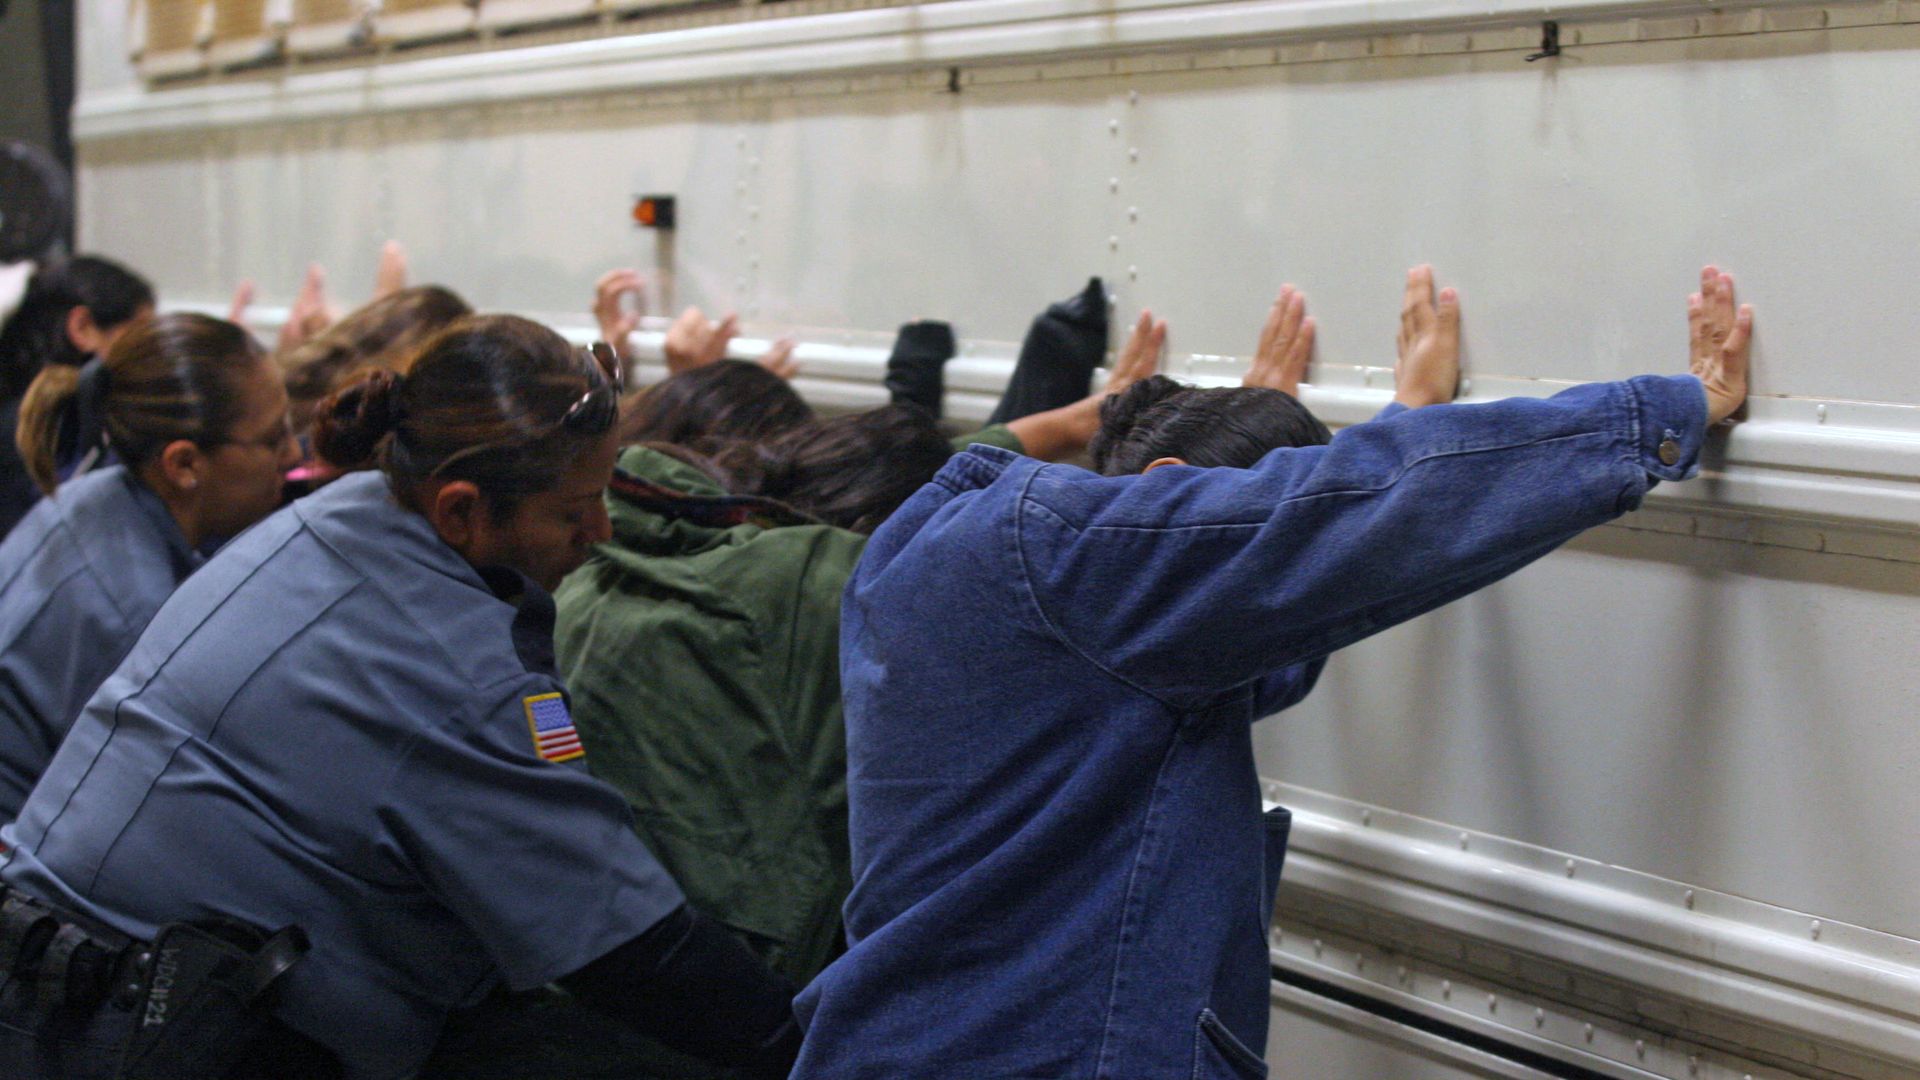 Salvadorean immigrants are told to put their hands on a bus while they are searched by the guards before being taken to the airport to be deported, at Willacy Detention facility in Raymondville, Texas on December 18, 2008.